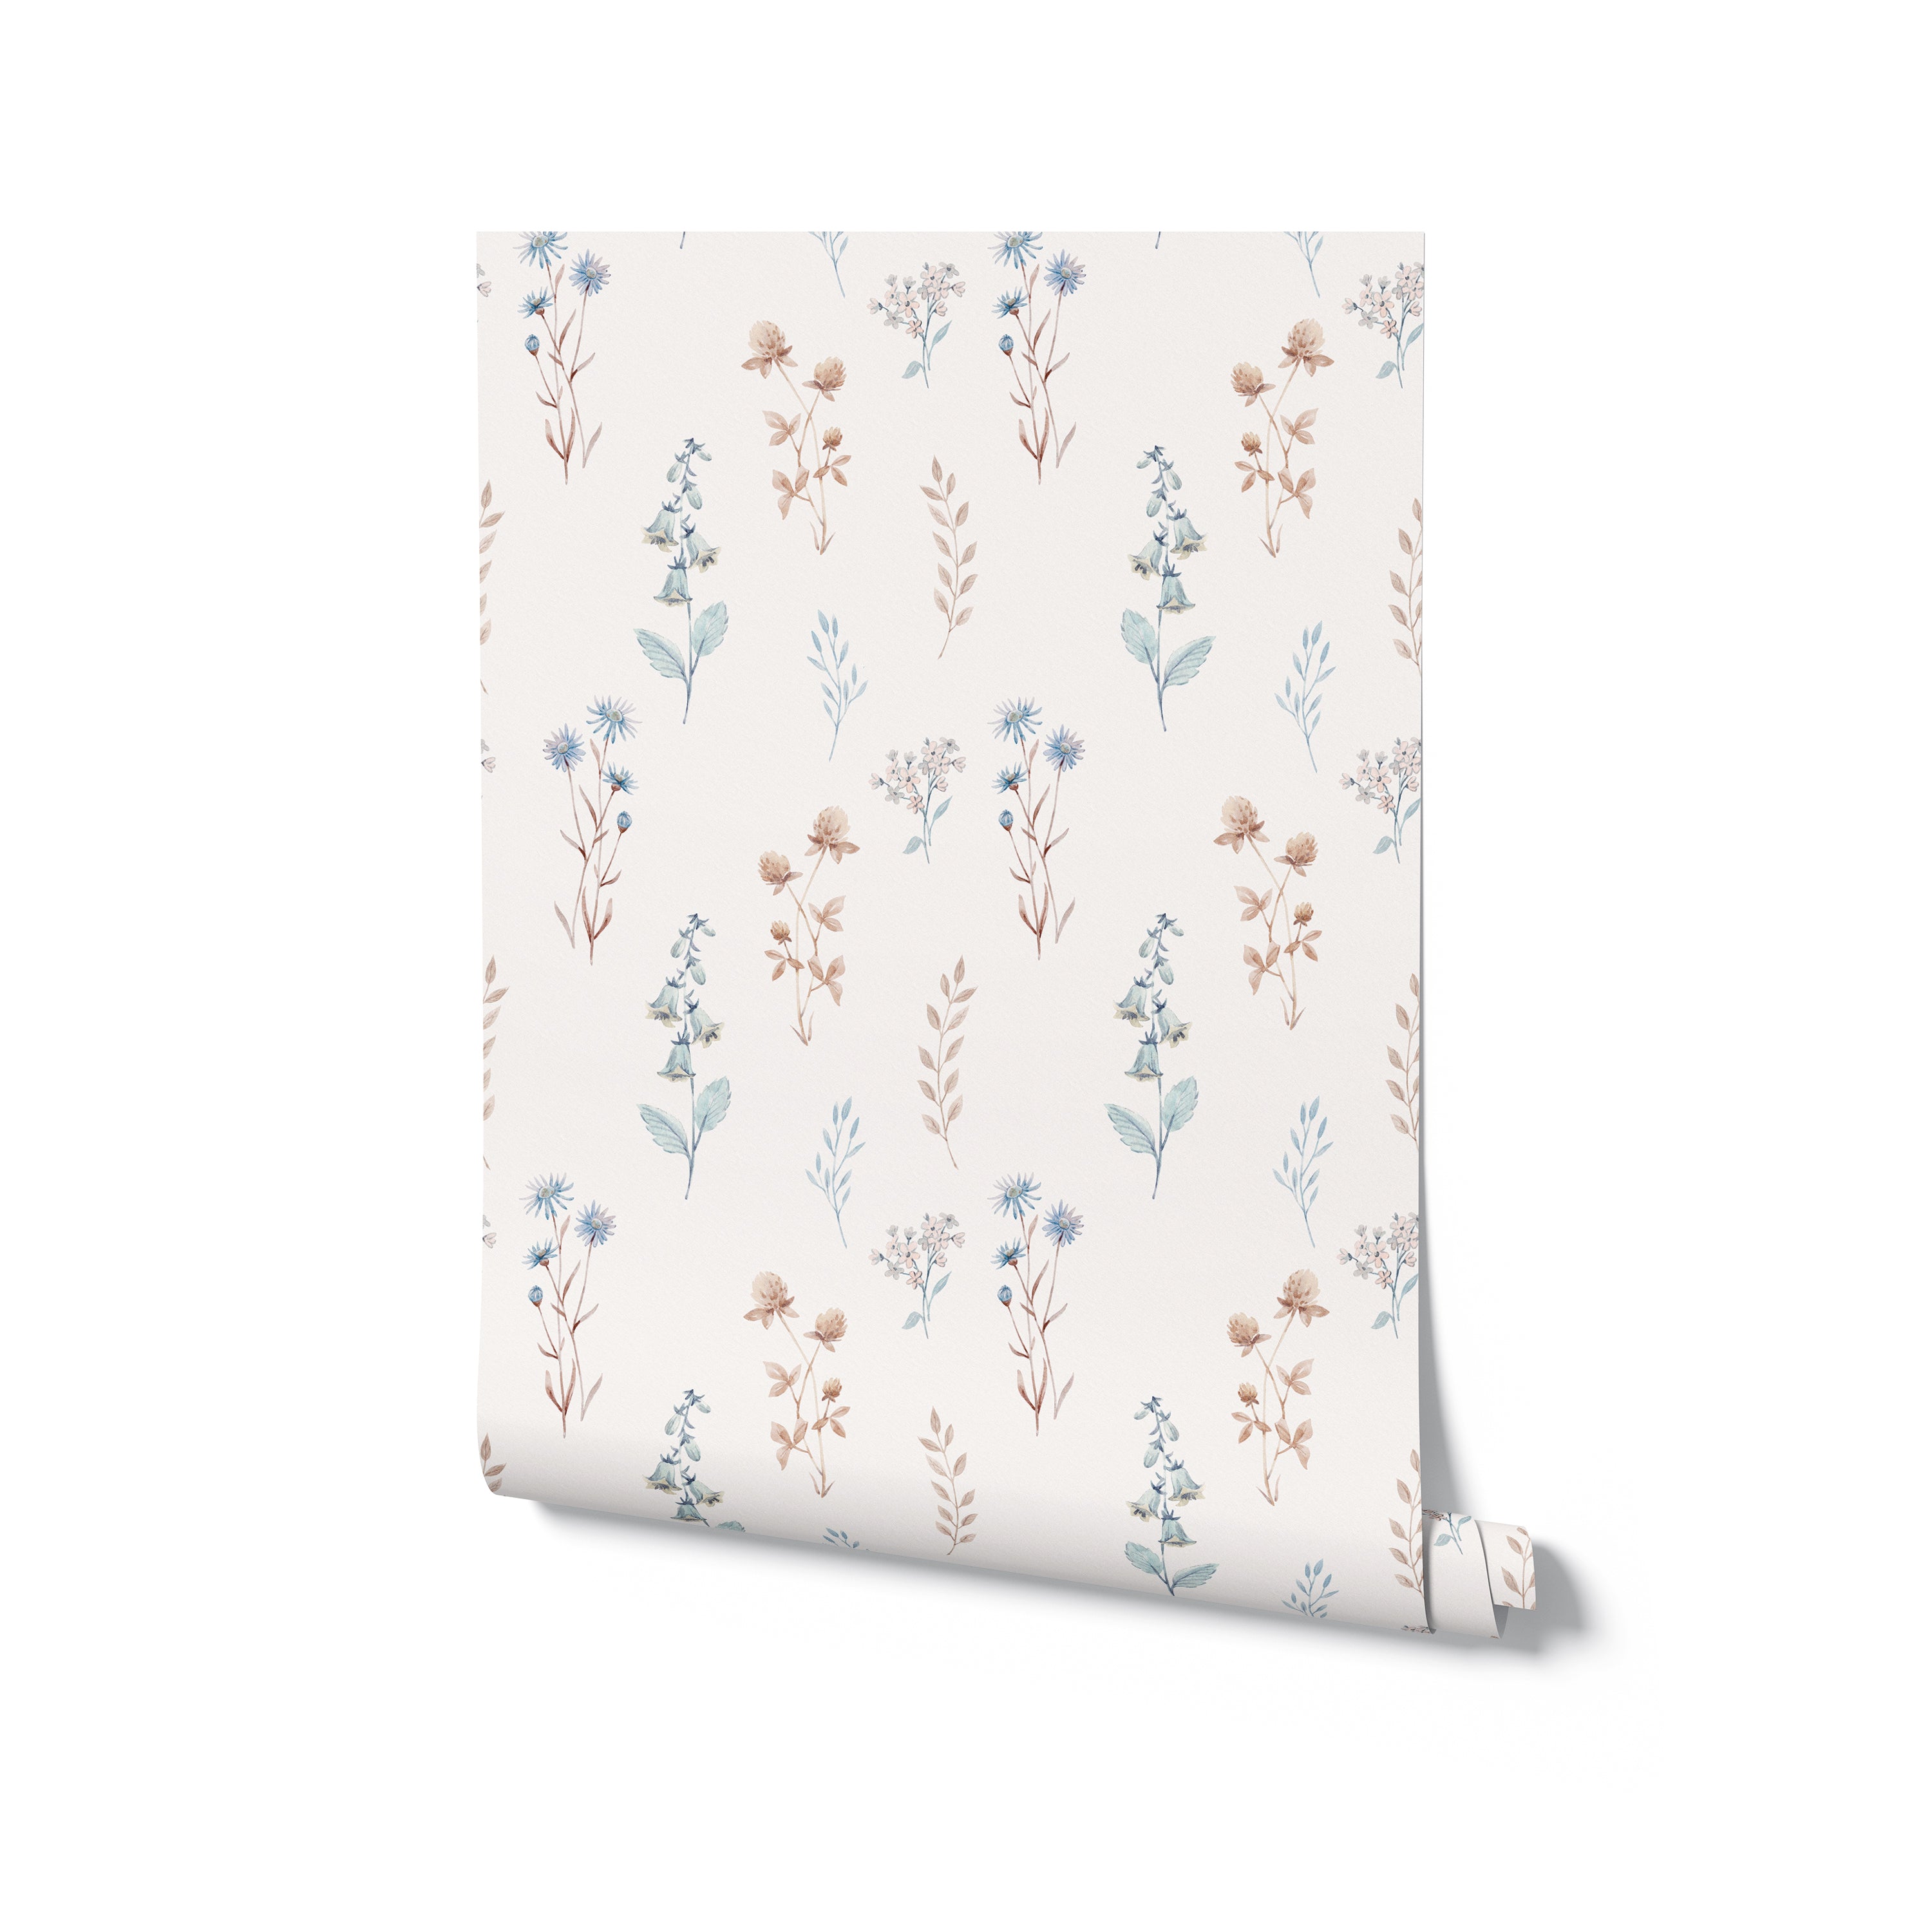 A roll of Bluebell Floral Wallpaper lying on a plain background. The wallpaper features elegant floral prints with blue and beige flowers and green foliage on a cream background, suitable for home interior design.